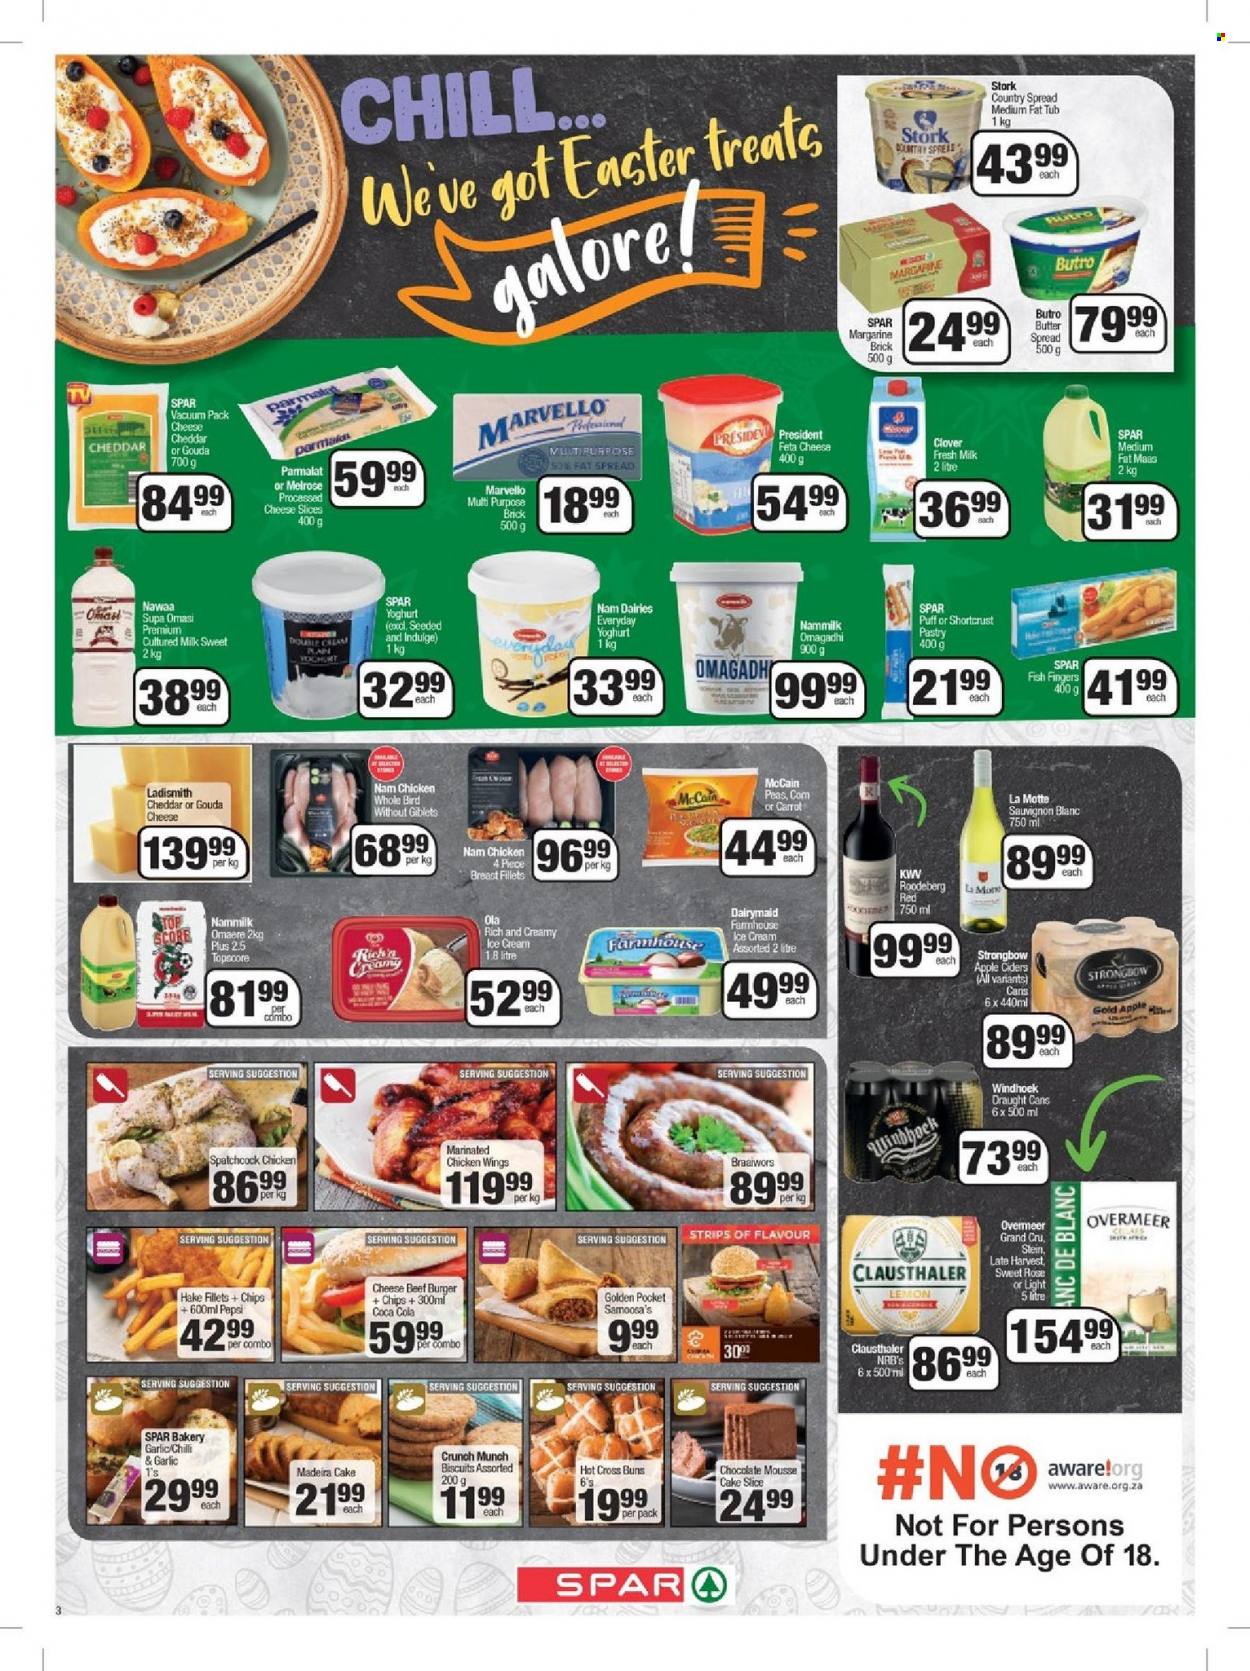 thumbnail - SPAR catalogue  - 21/03/2023 - 10/04/2023 - Sales products - cake, buns, shortcrust pastry, madeira cake, hake, fish, fish fingers, fish sticks, hamburger, beef burger, gouda, sliced cheese, cheese, Président, feta, Melrose, yoghurt, Parmalat, milk, amasi, margarine, fat spread, Ladismith, ice cream, Ola, chicken wings, strips, McCain, biscuit, chips, Coca-Cola, Pepsi, white wine, KWV, Sauvignon Blanc, rosé wine, Strongbow, whole chicken, spatchcock chicken, marinated chicken, chicken. Page 2.